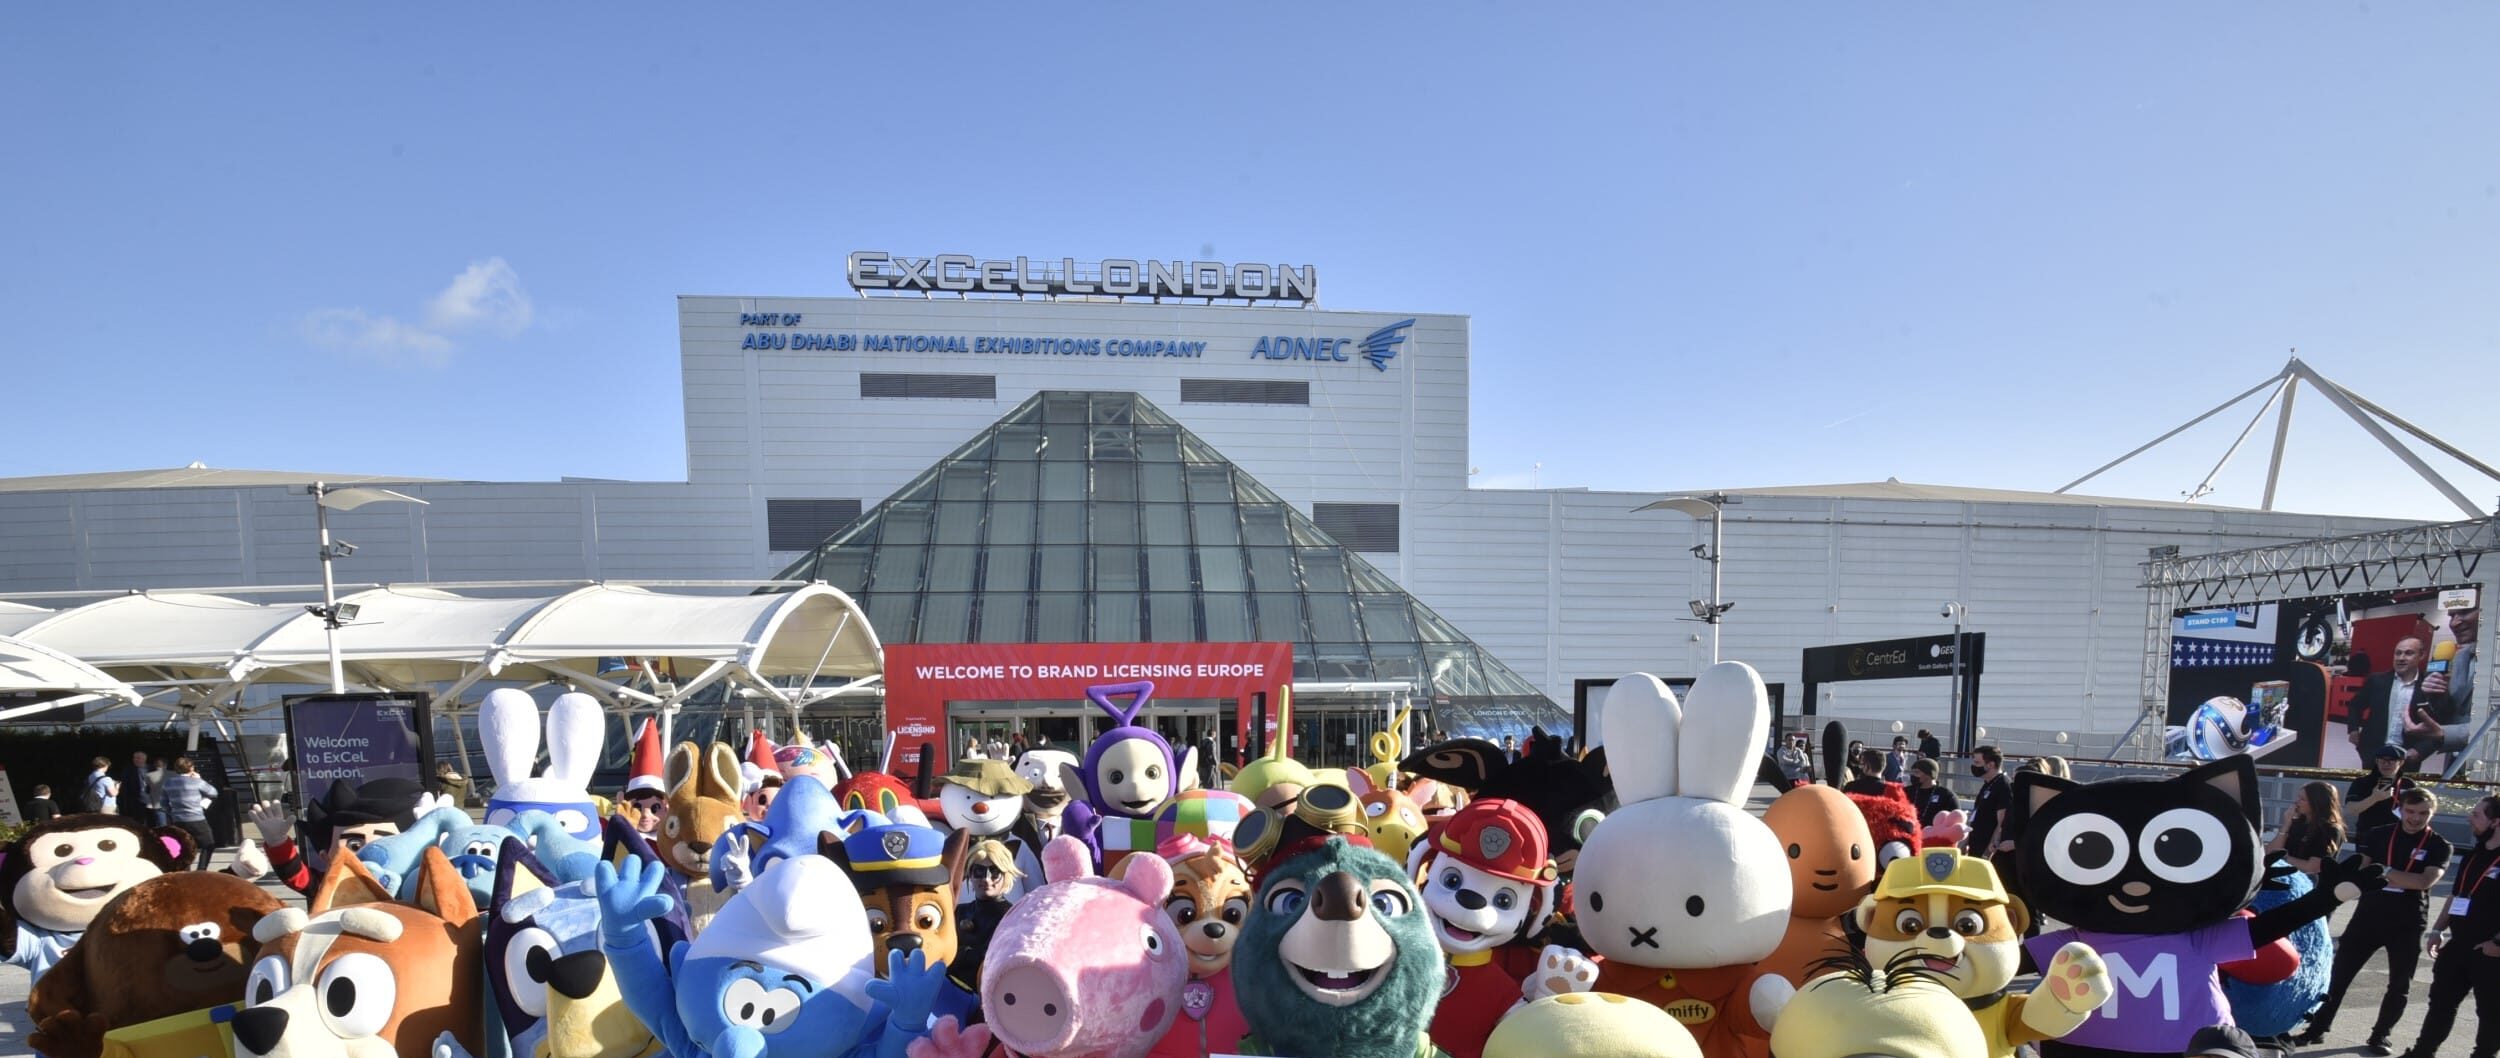 People gather outside ExCeL London for the Brand Licensing Europe event